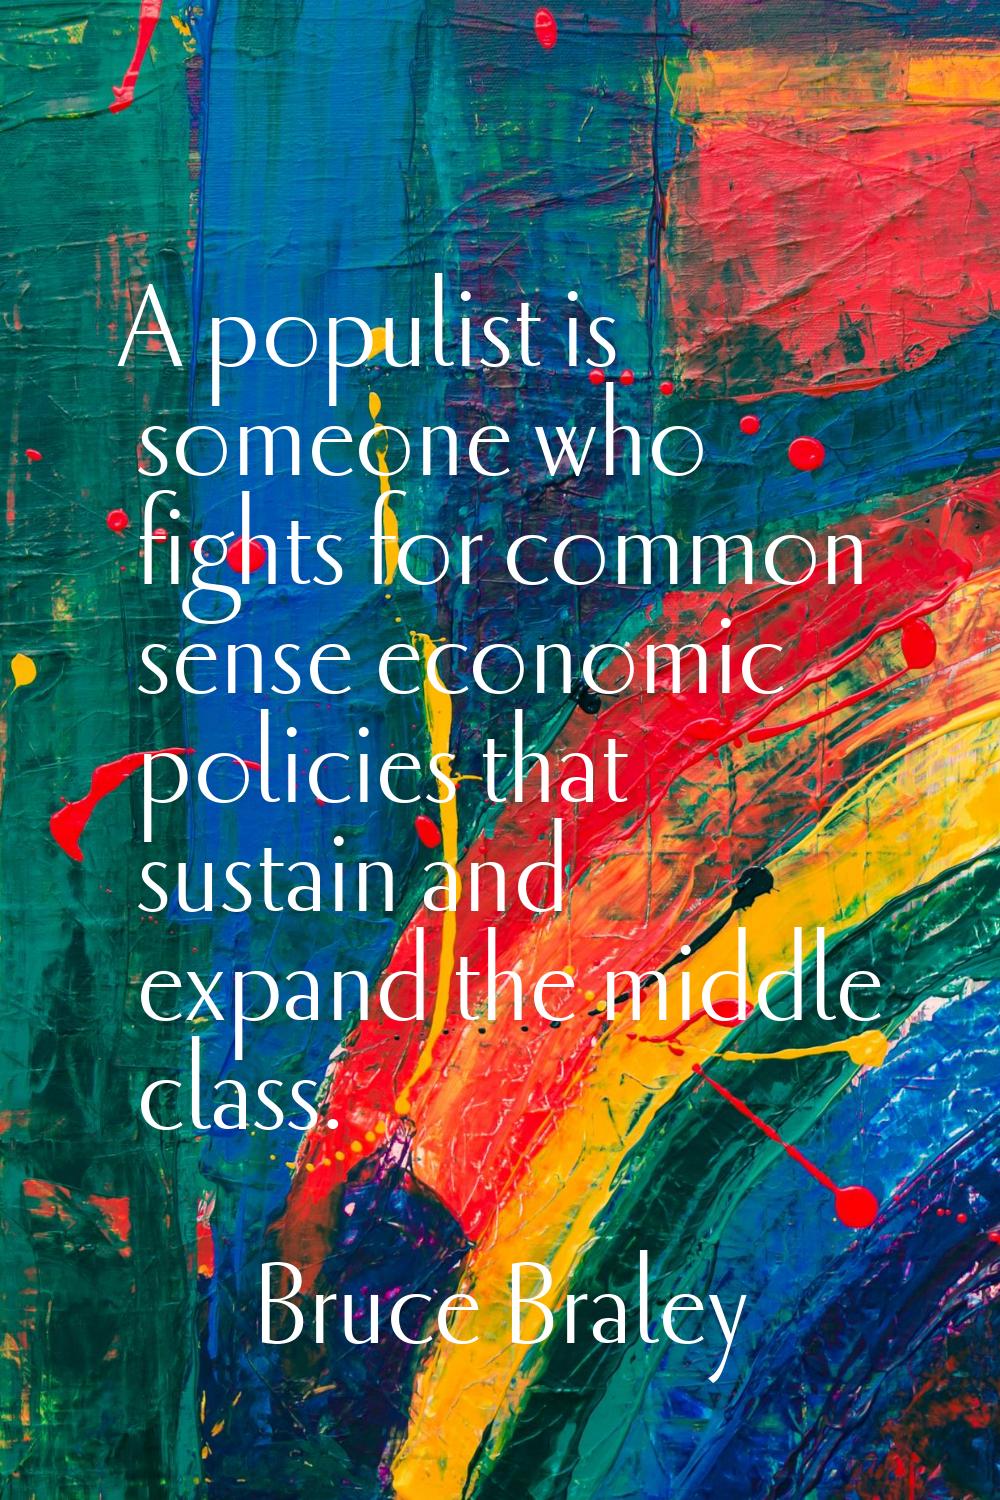 A populist is someone who fights for common sense economic policies that sustain and expand the mid